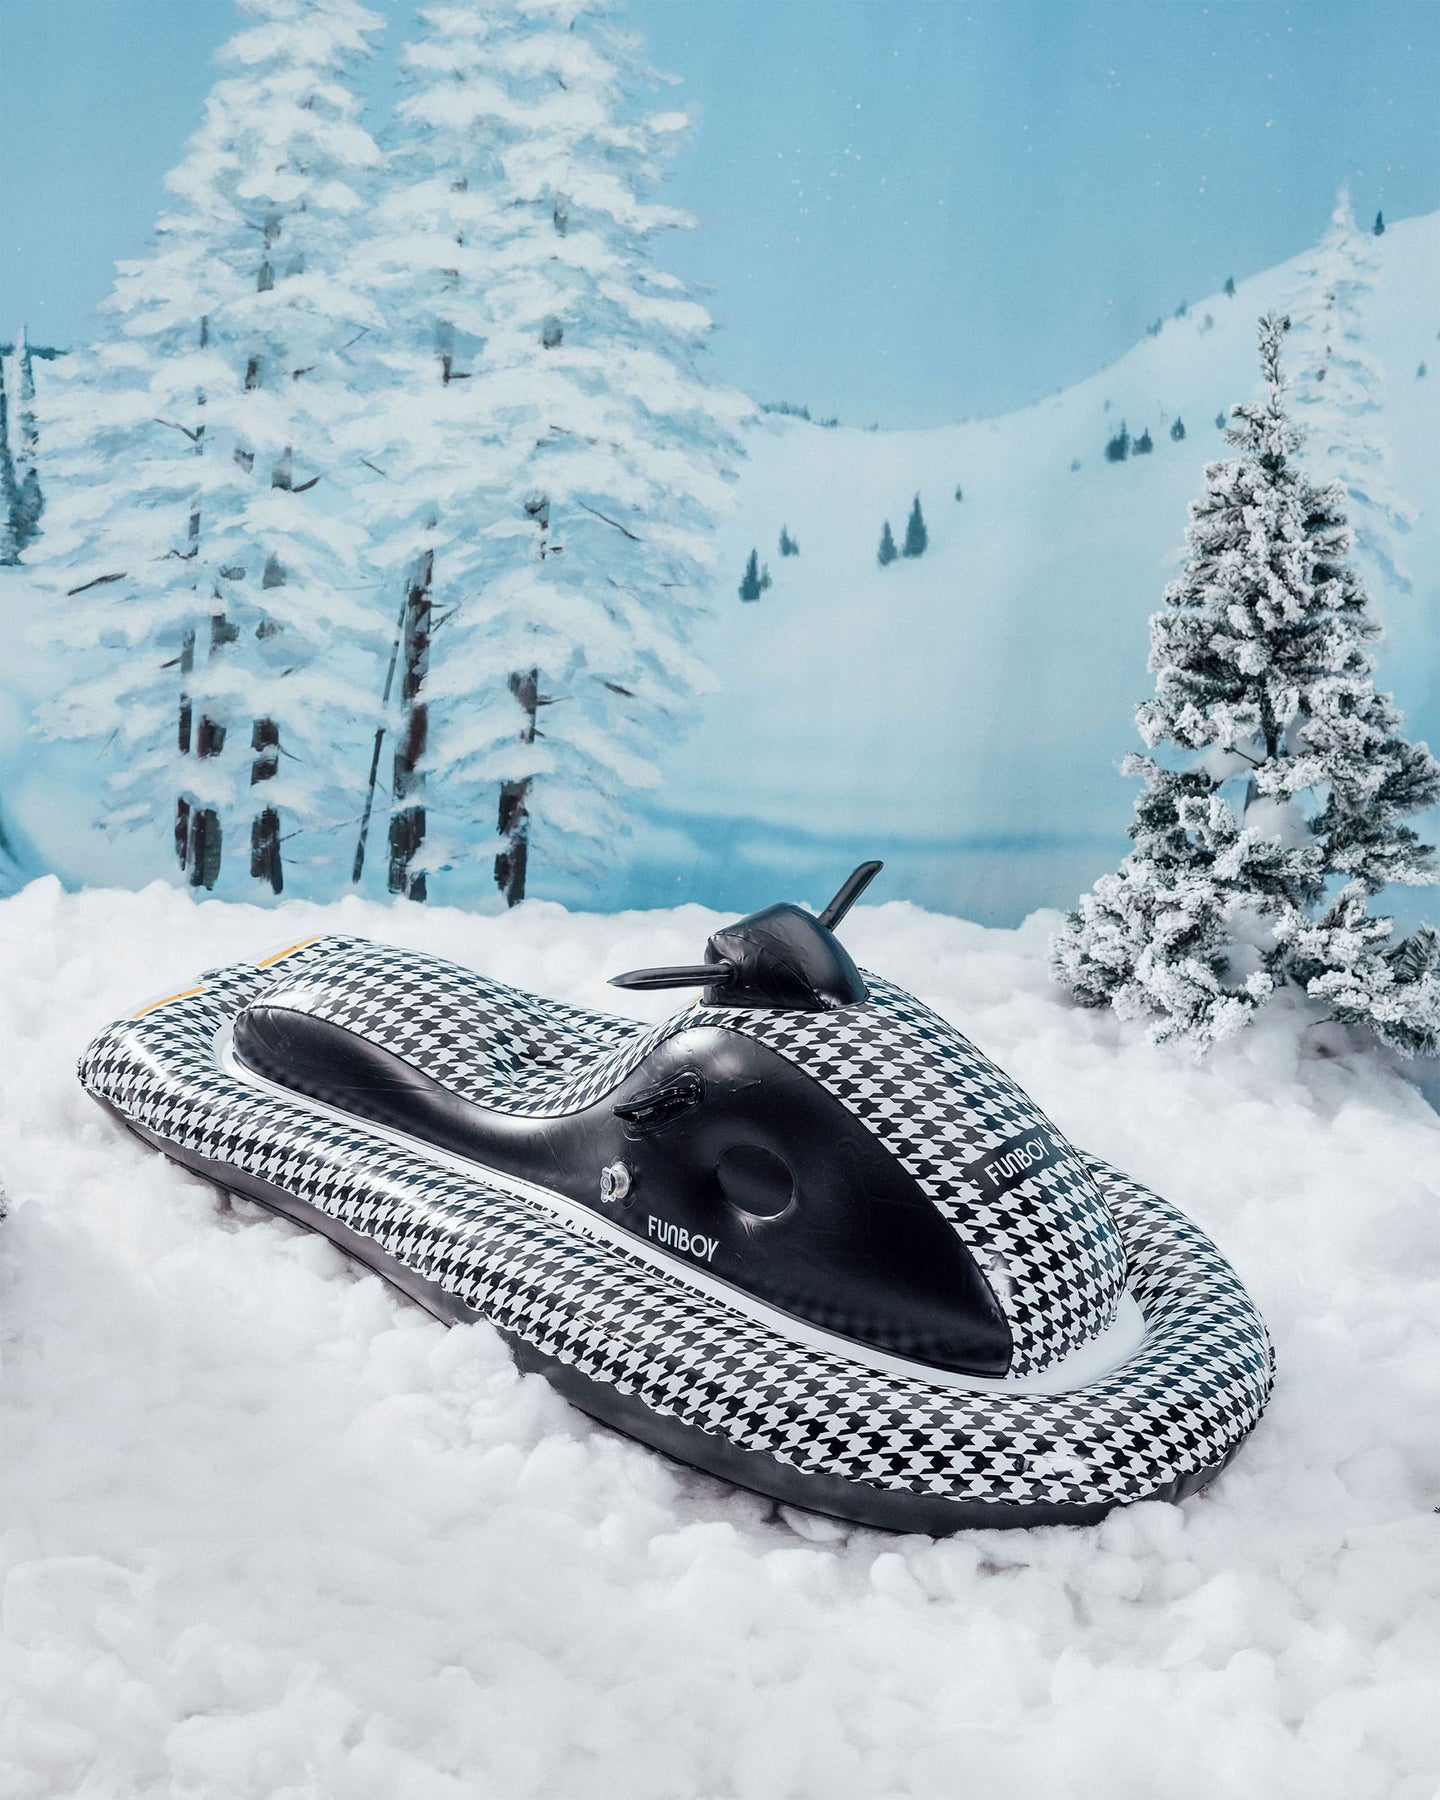 FUNBOY Black Houndstooth Midnight Racer Snowmobile Sled